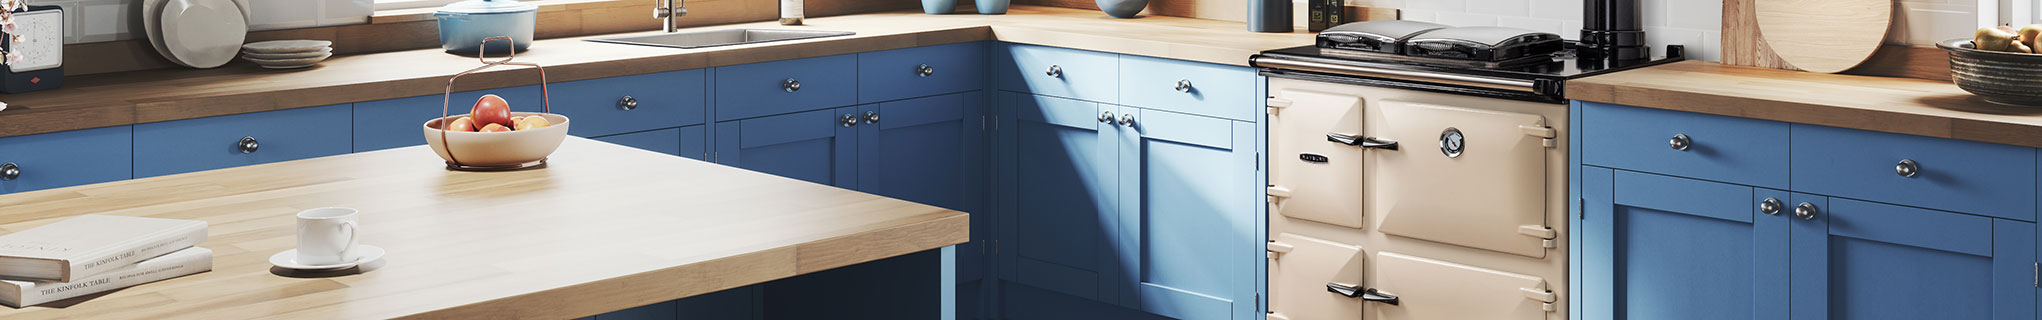 Rayburn Heatranger in Linen with blue cabinetry